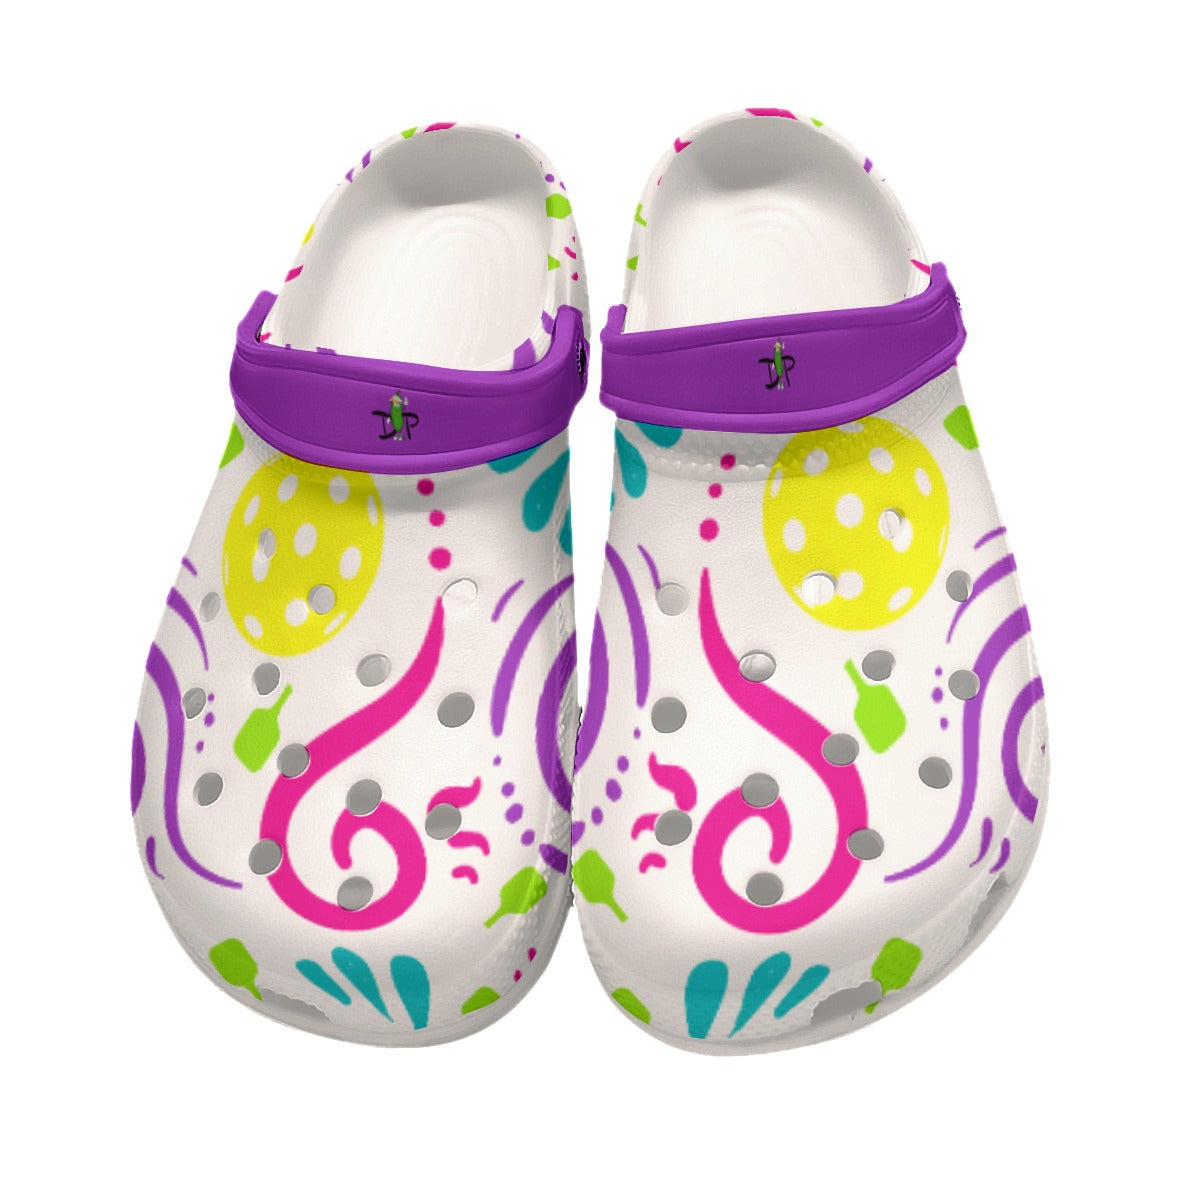 It's Swell - White - Pickleball Women's Clogs by Dizzy Pickle